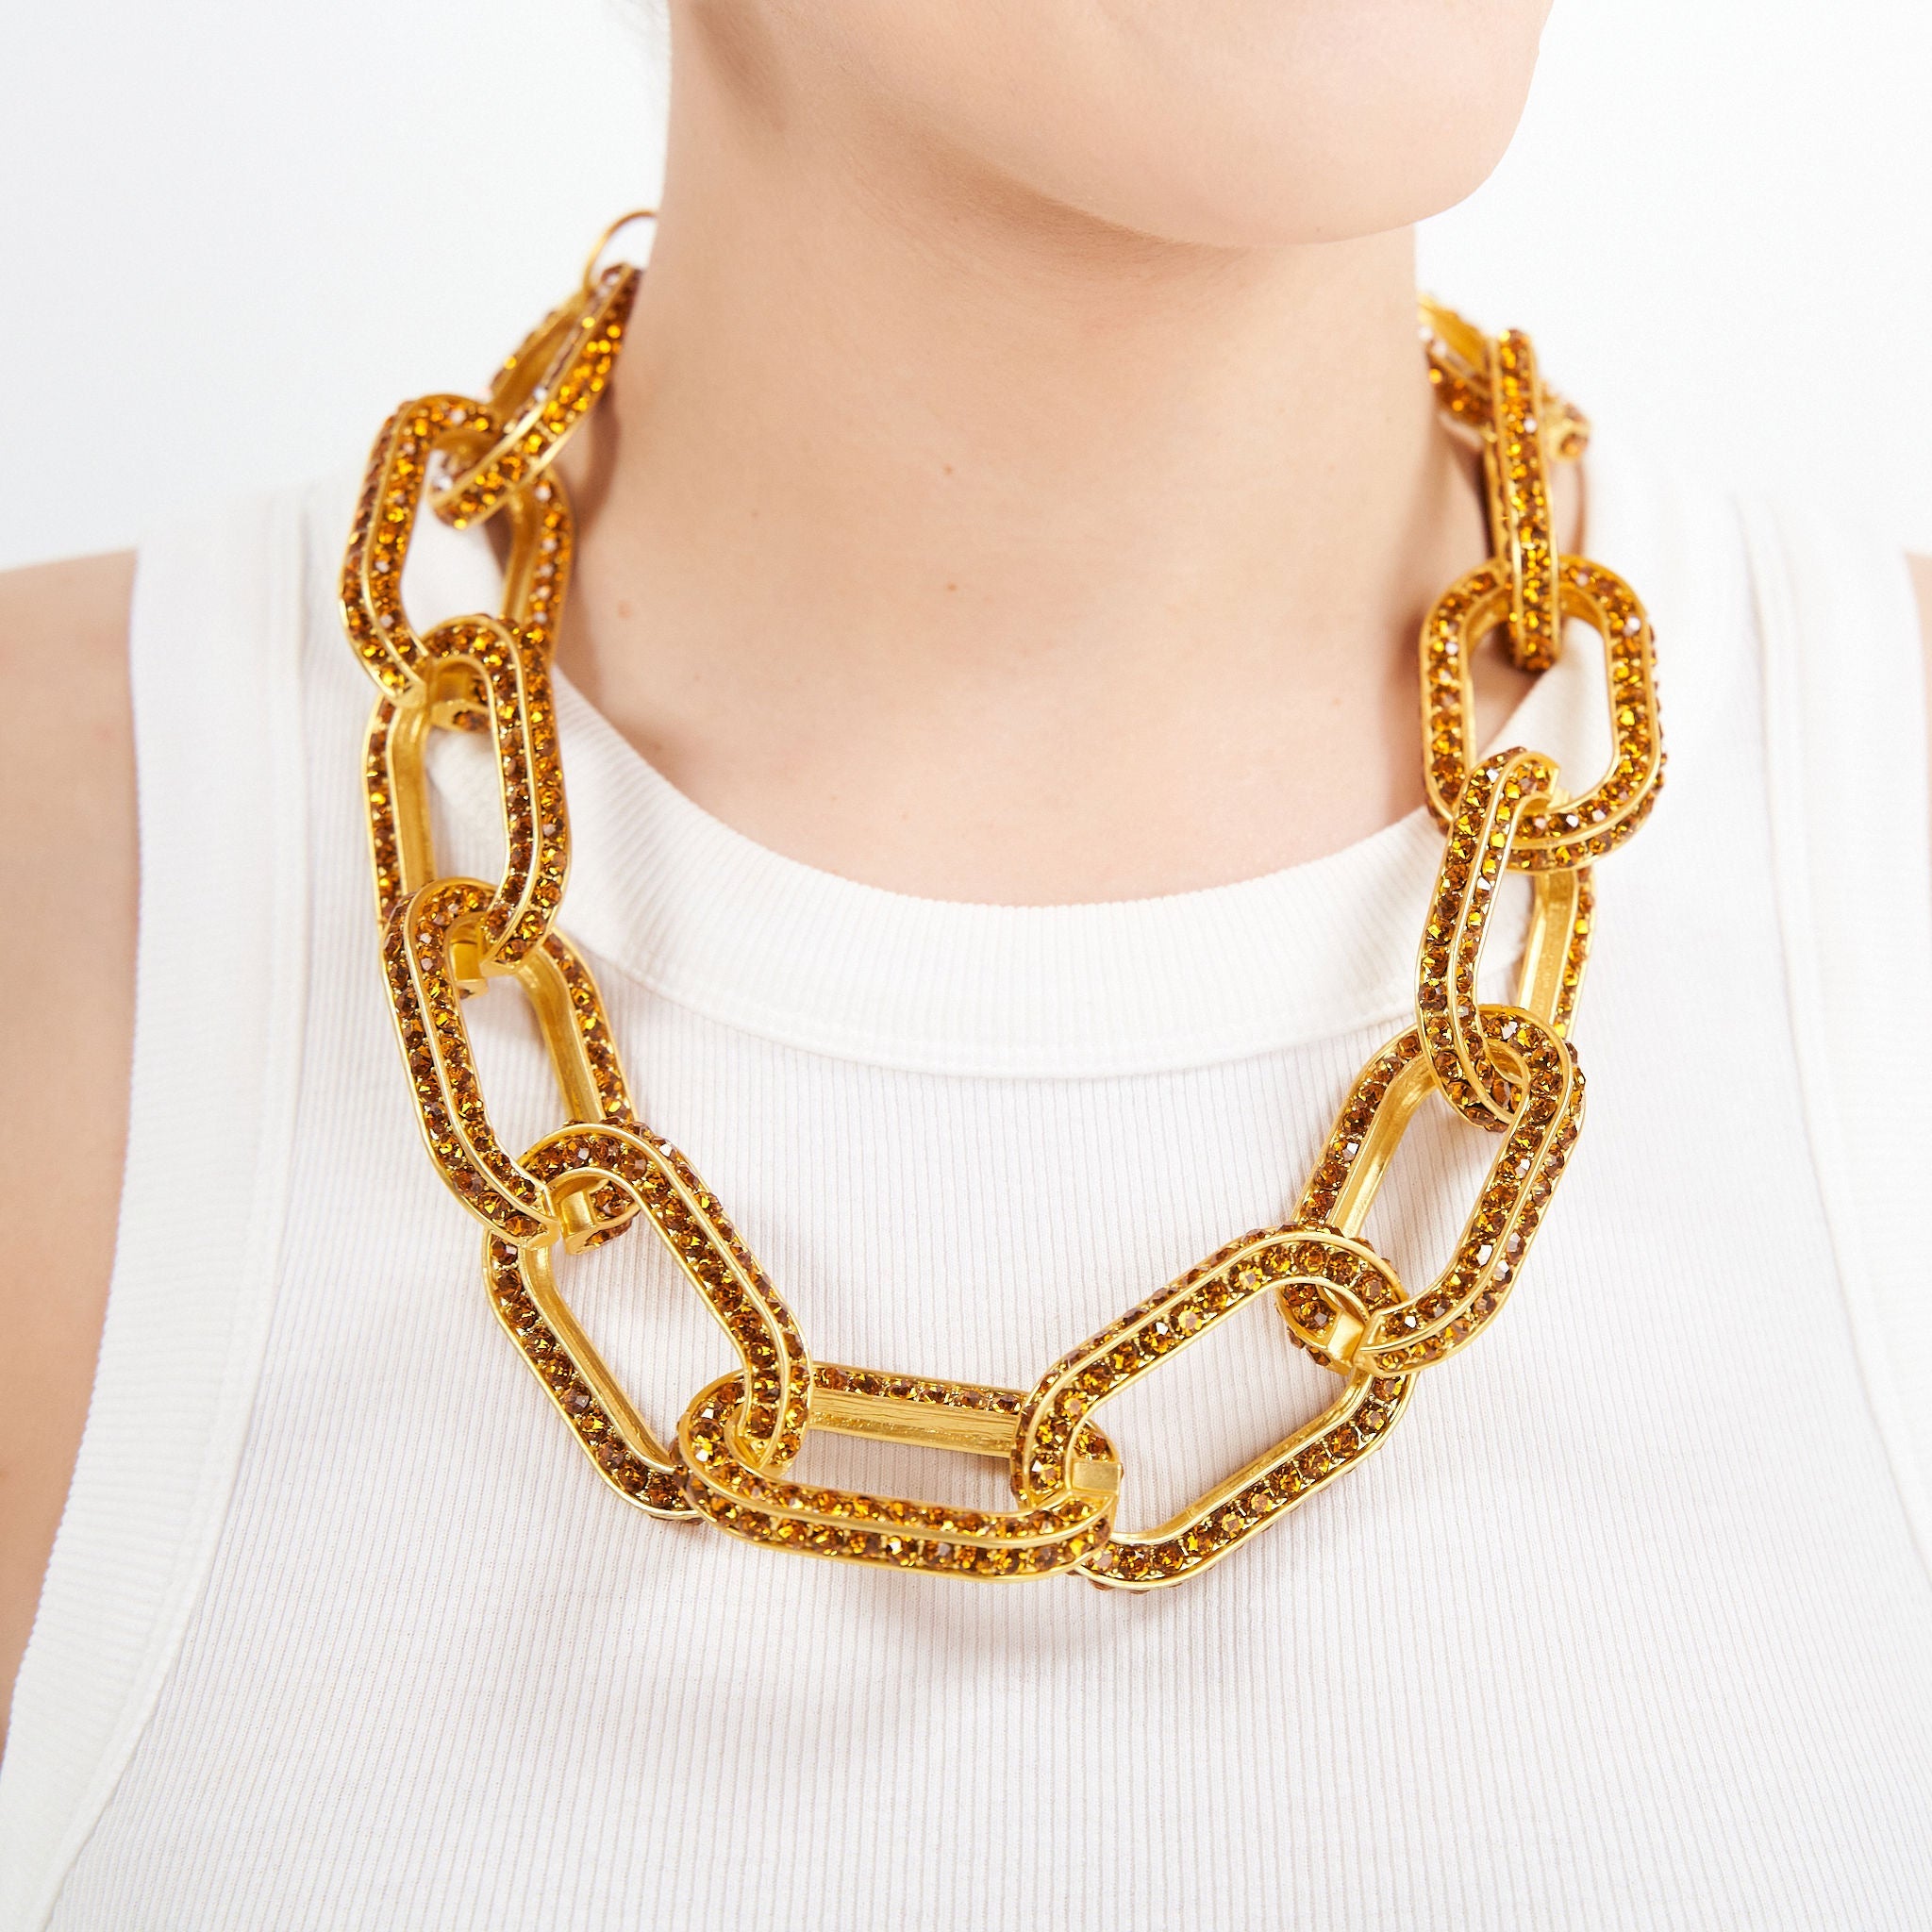 Kerri Chain - Gold - Sassy Jones - -Oversized interlocking chain links -Inlaid with golden Colorado topaz crystals -Matte gold metal hardware -6-inch extender and easy hook closure